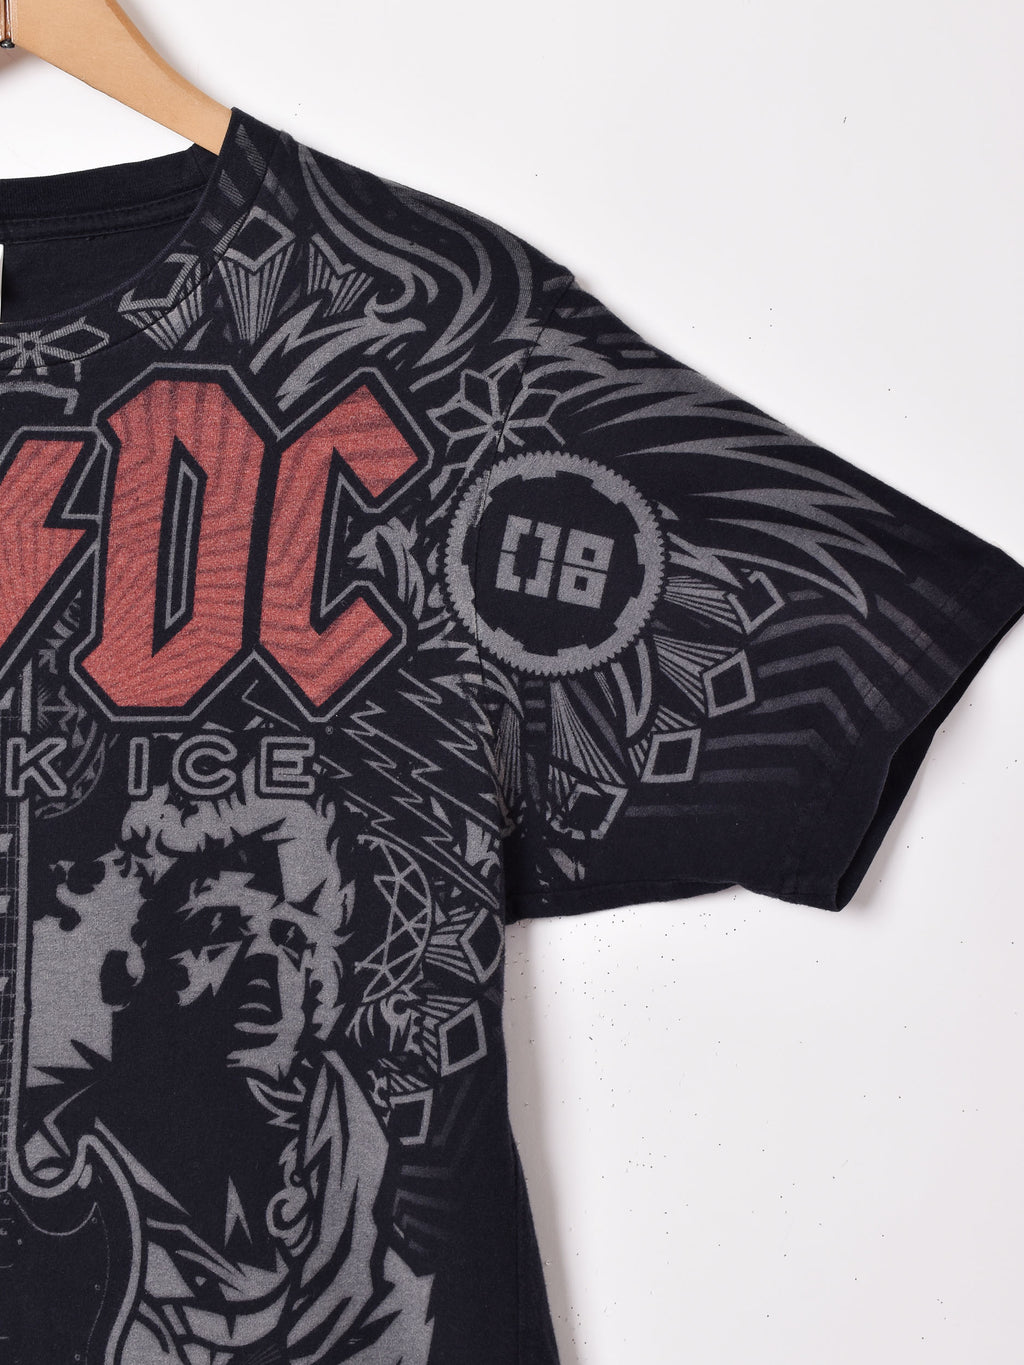 80's ACDC "WORLD TOUR"official Tシャツ バンドT